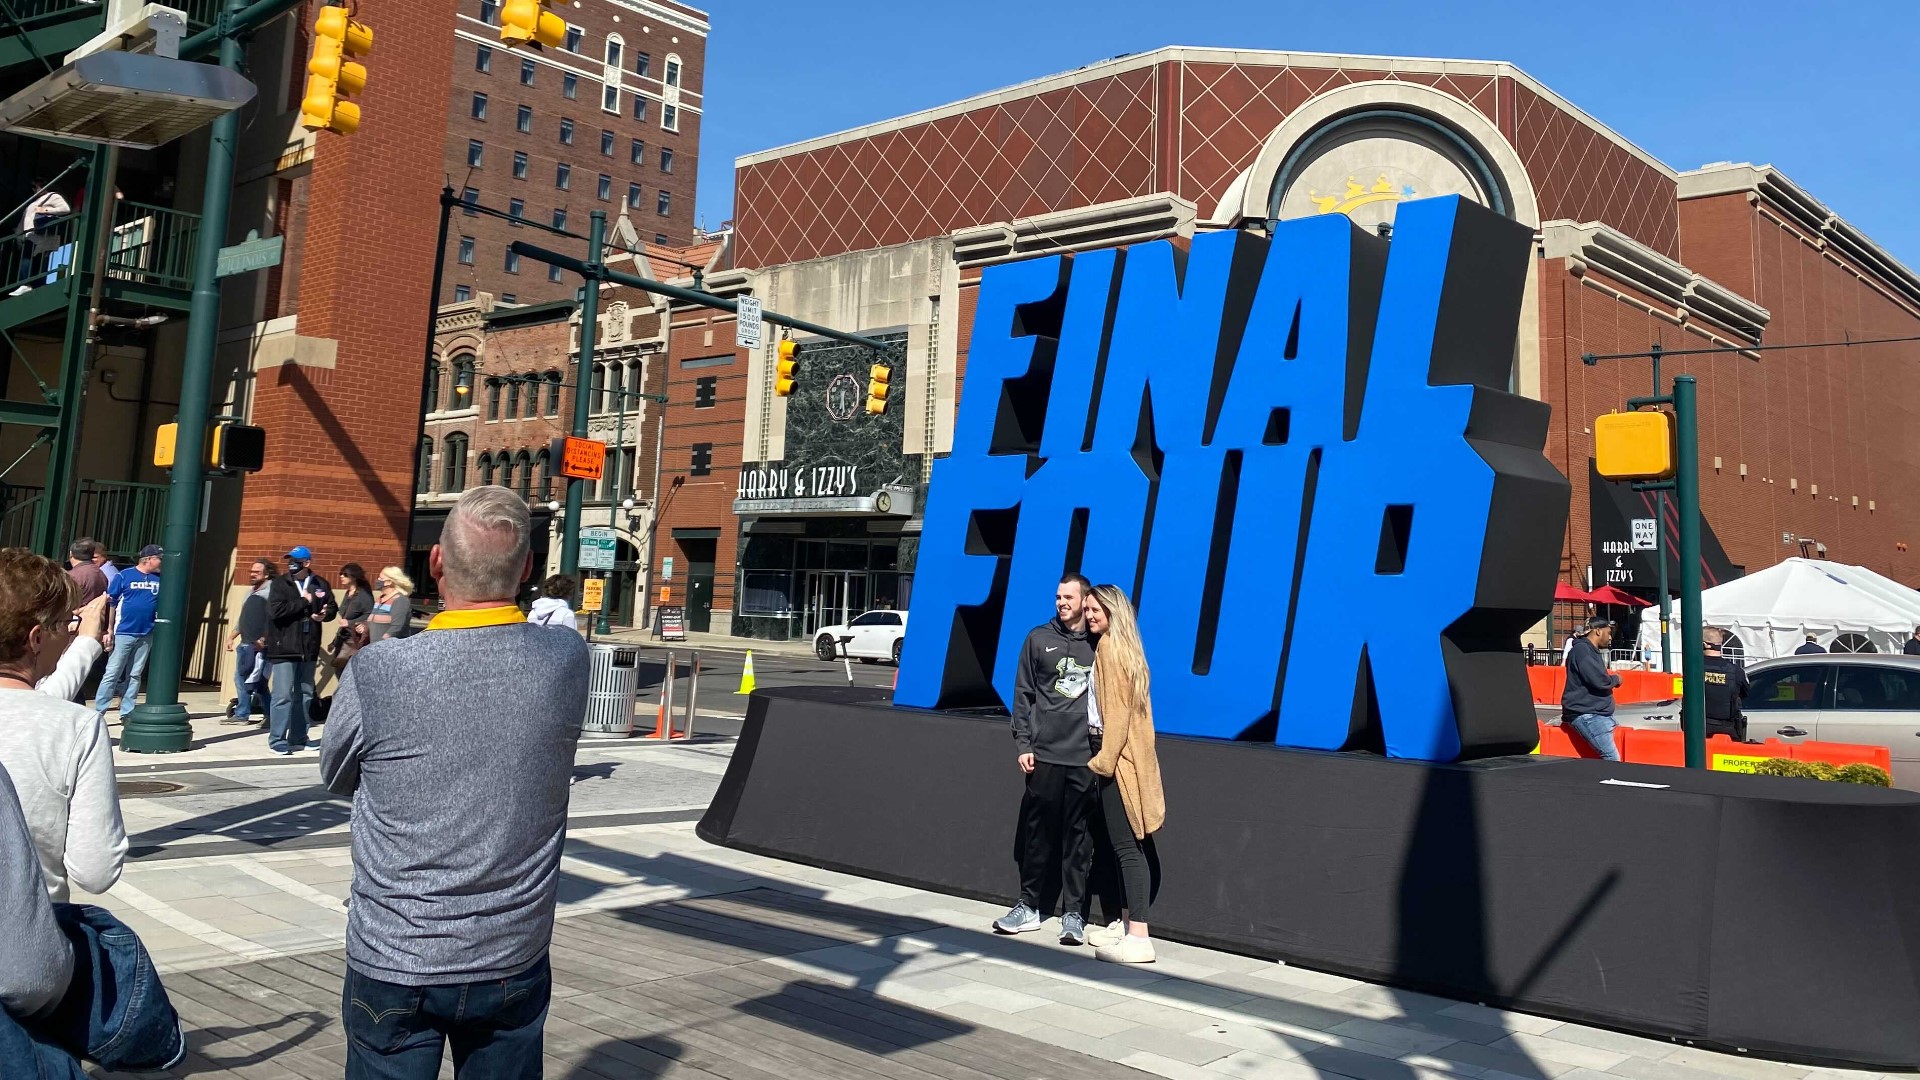 Hoosiers got their basketball fix on Saturday with the Final Four at Lucas Oil Stadium and high school boys basketball state finals at Bankers Life Fieldhouse.